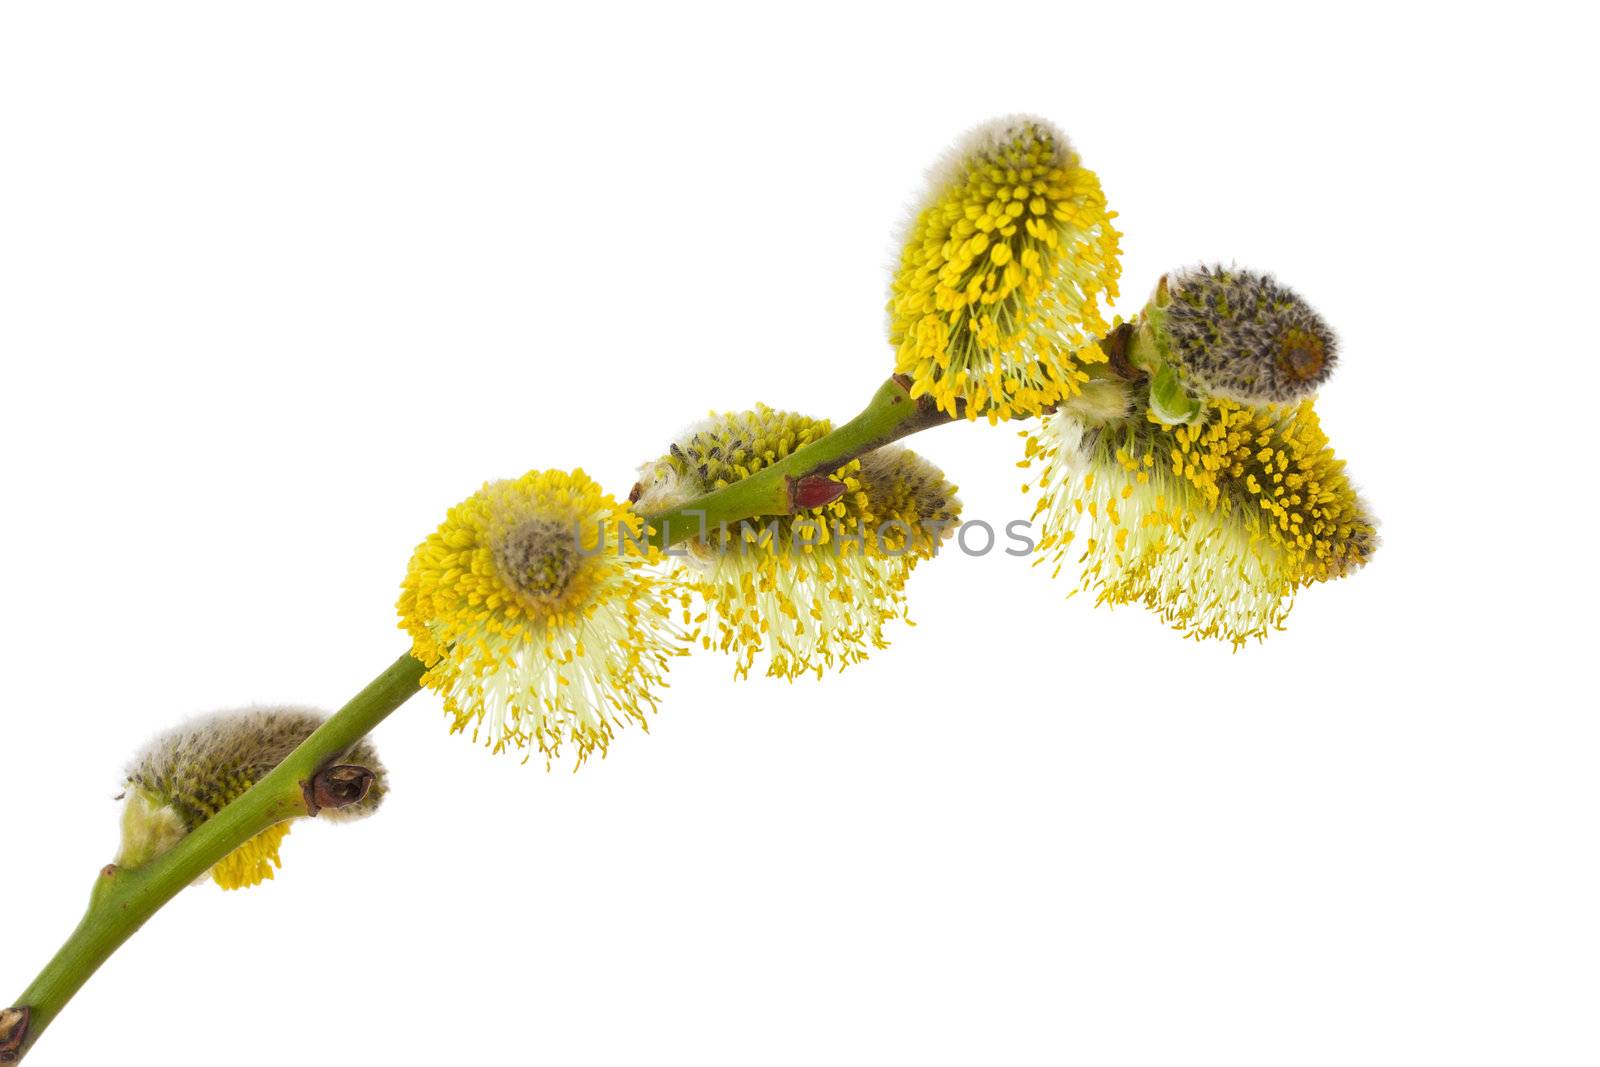 close-up pussy willow branch, isolated on white